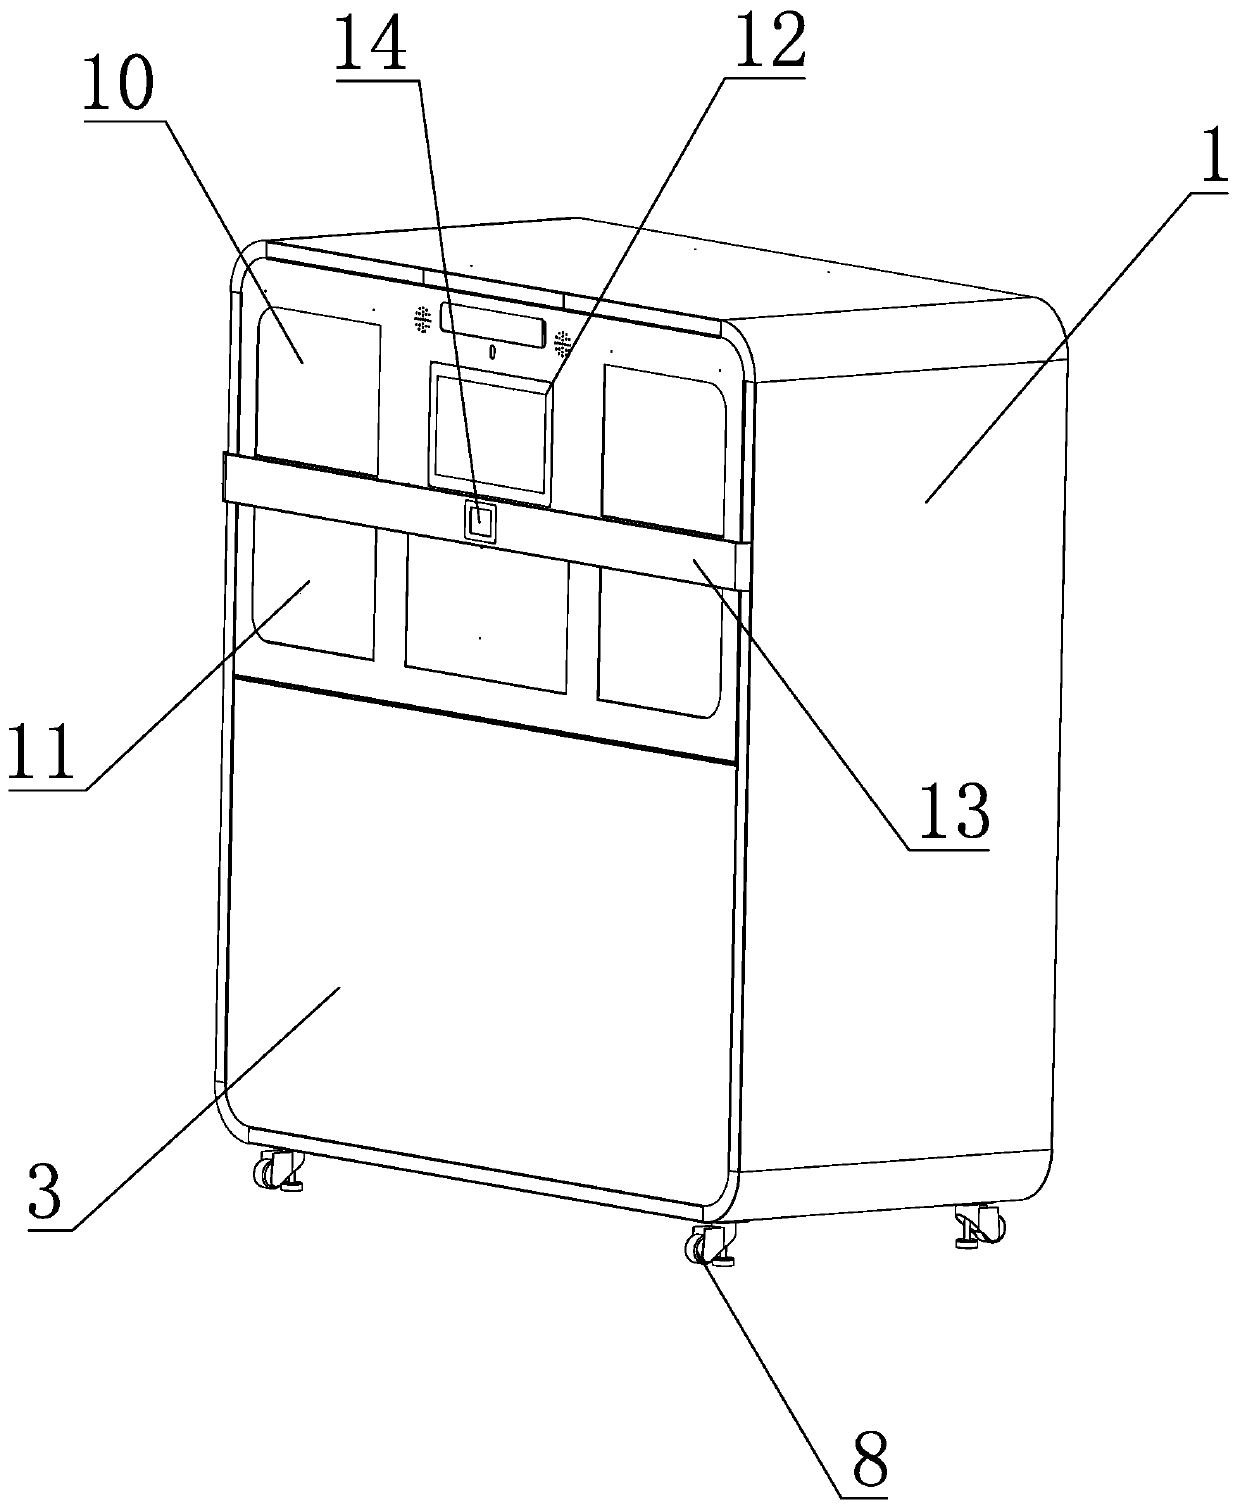 Garbage classification and recovery device